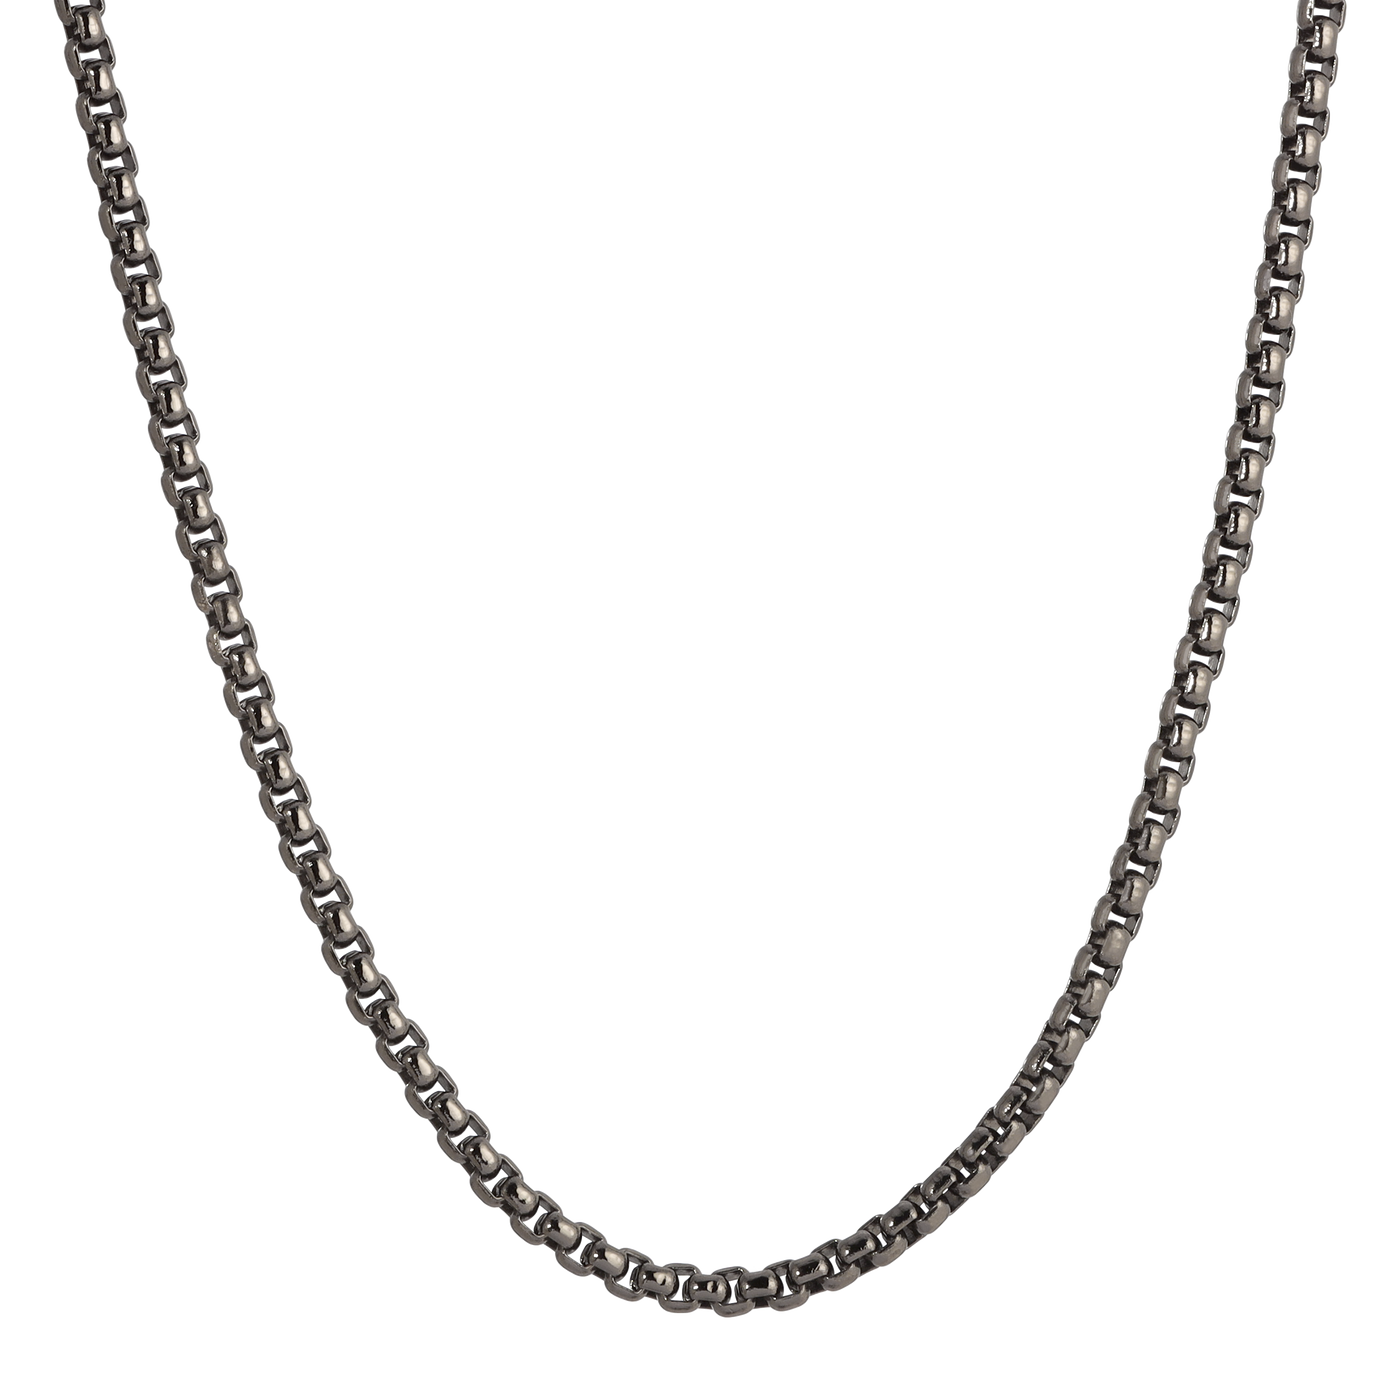 Gunmetal Plated 31" Chain Necklace